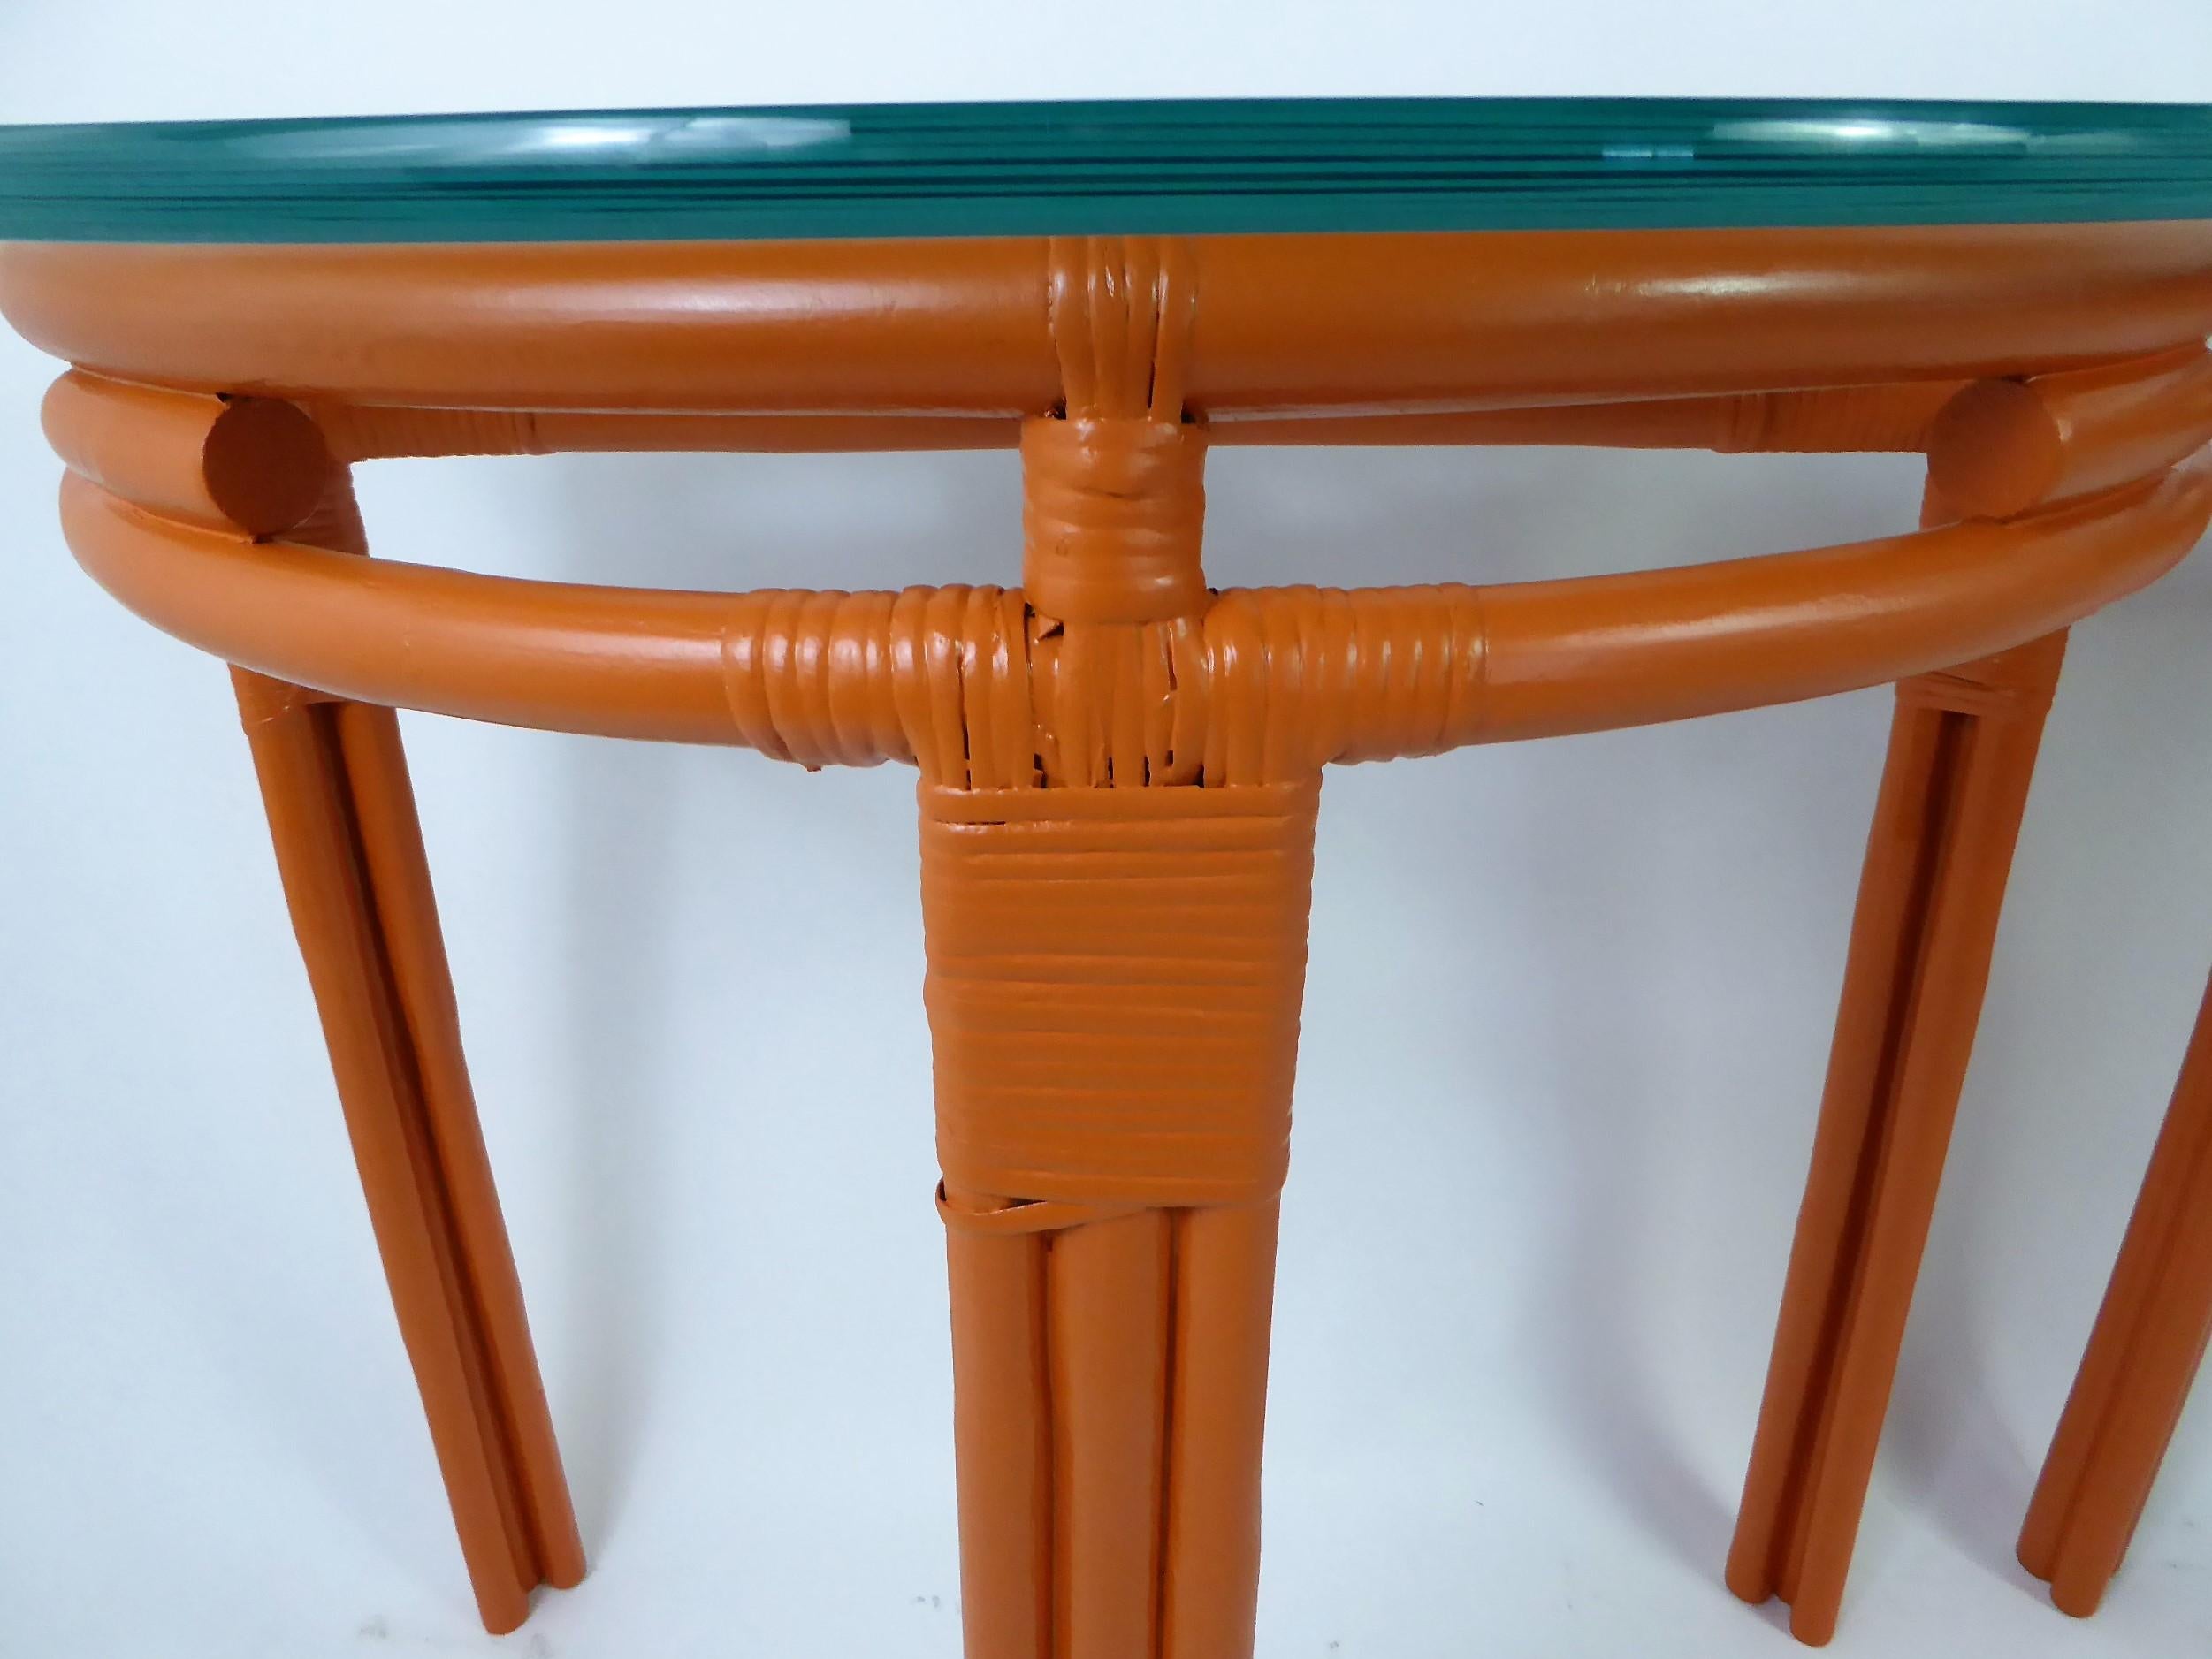 1940s Painted Rattan Demilune Glass Top Consoles in Hermes Orange 12